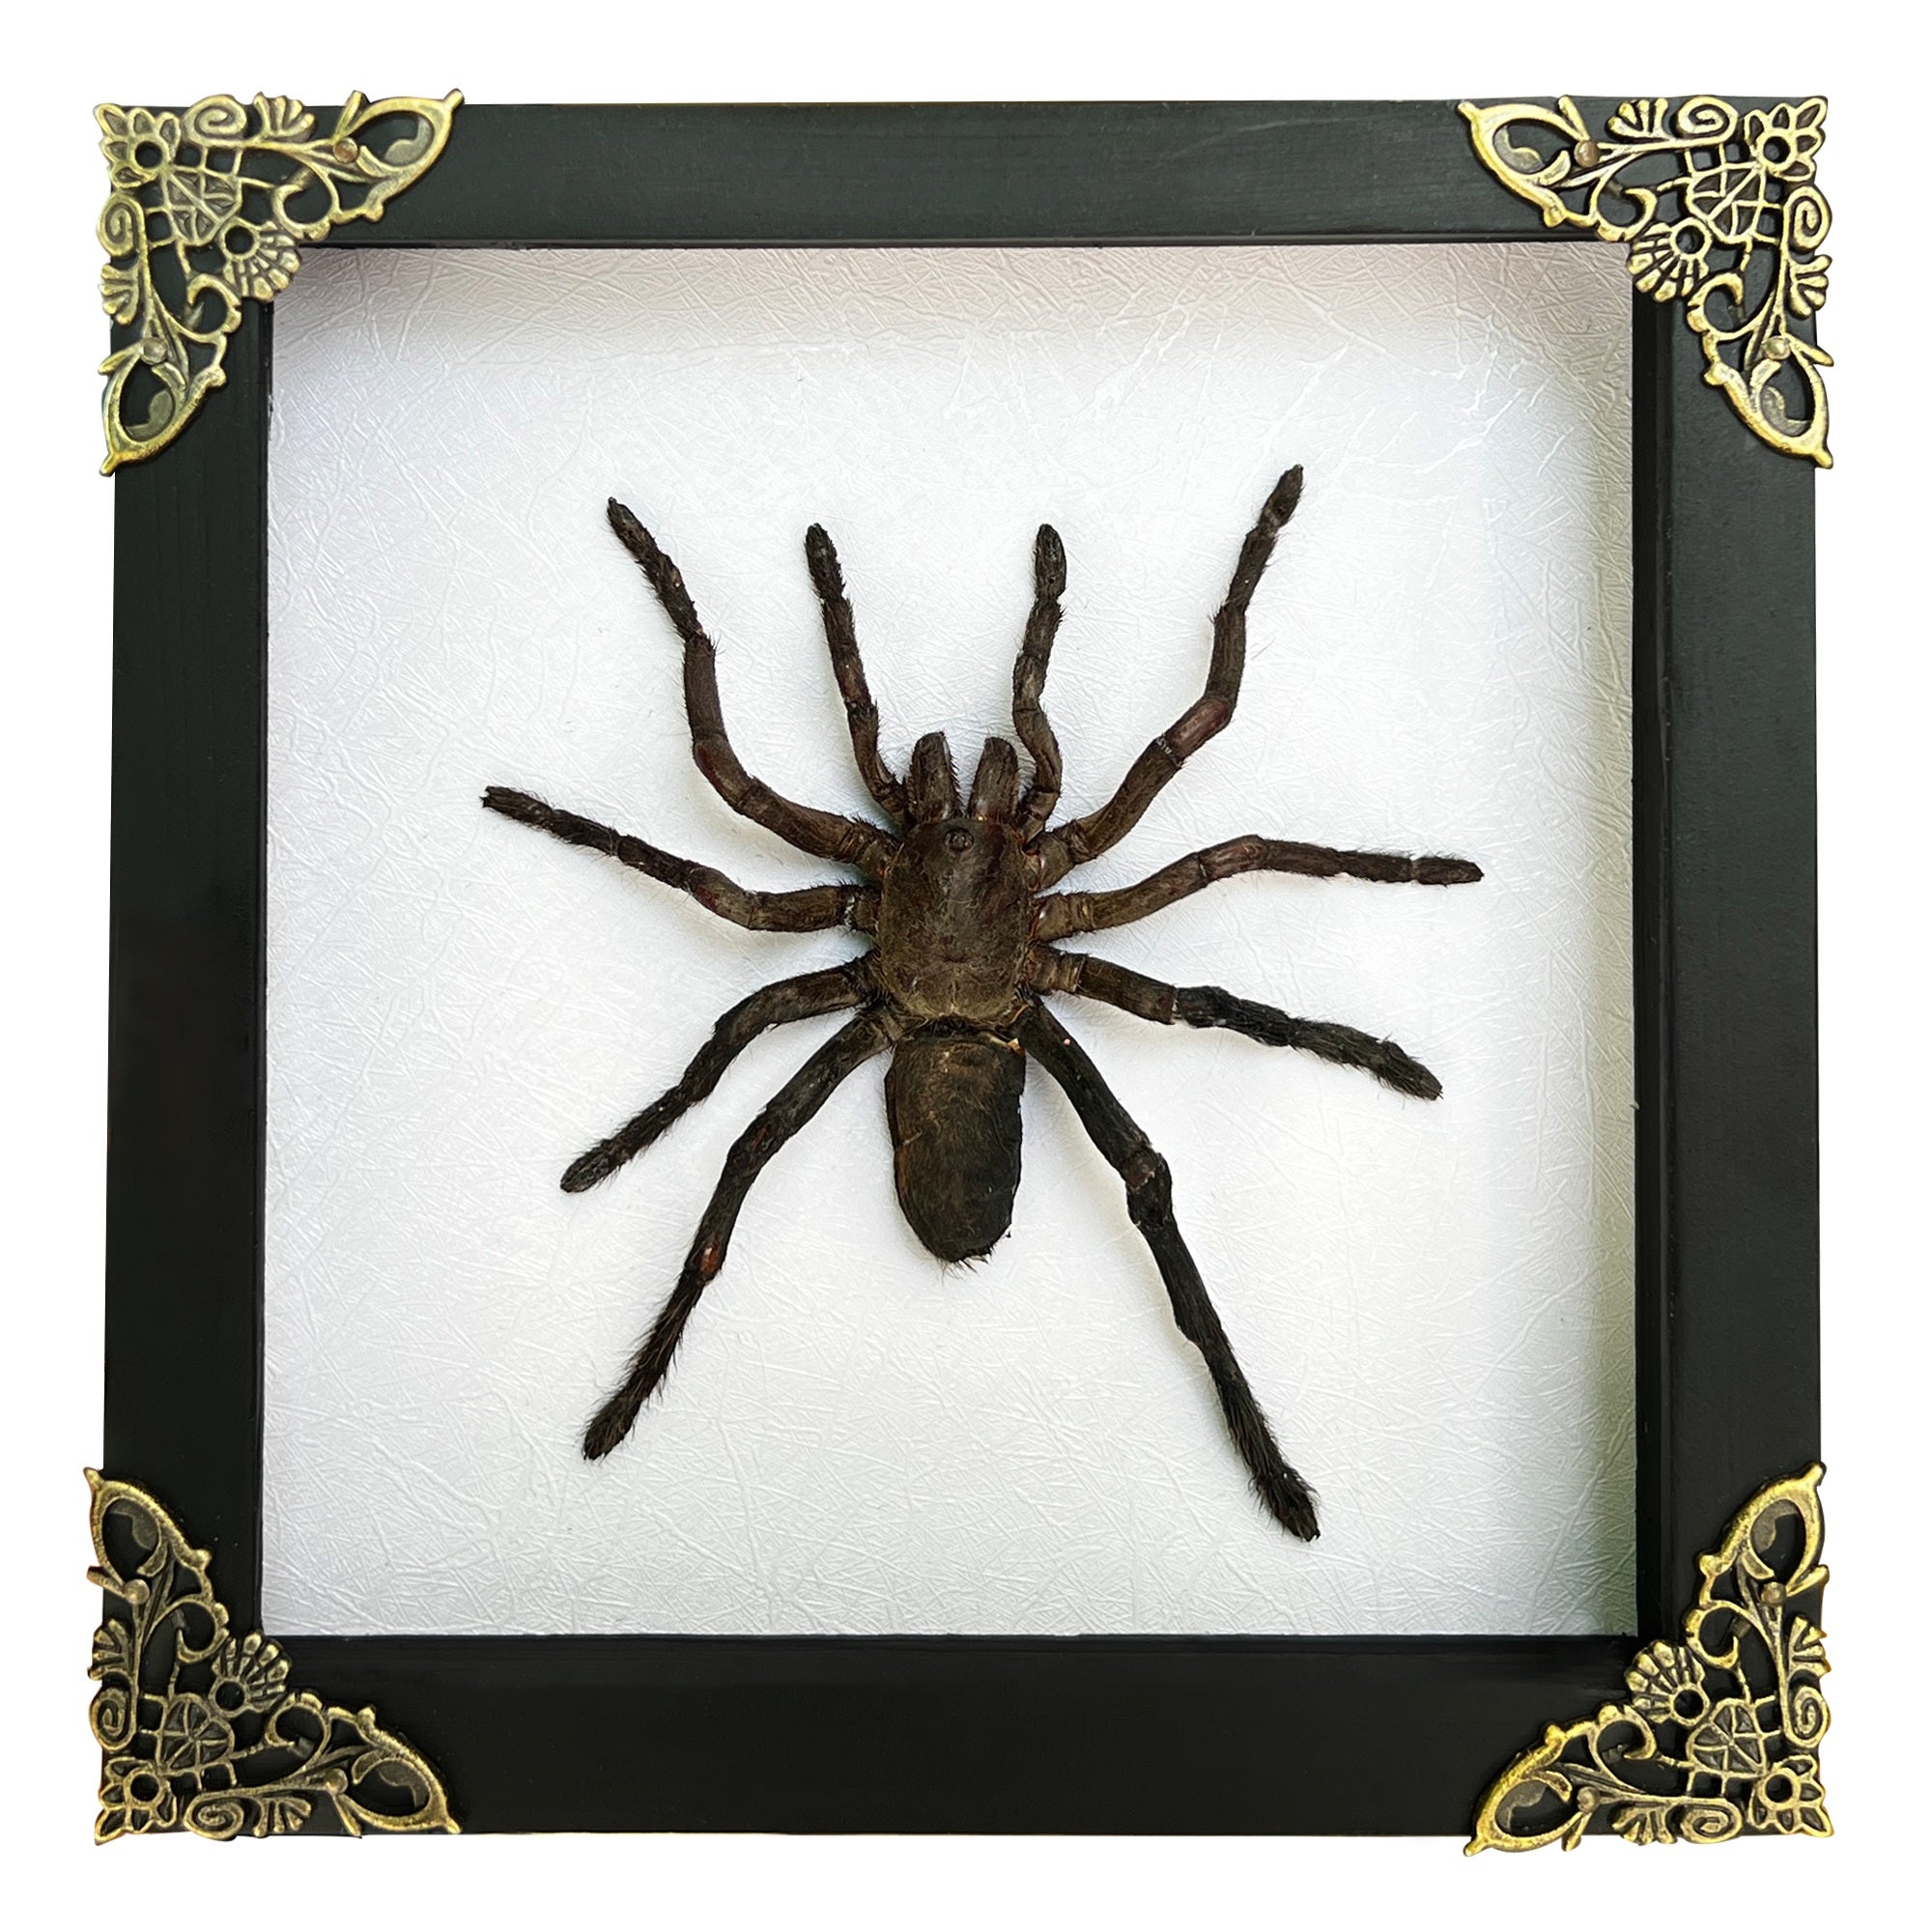 Real Giant Spider White Frame Beetle Insect Gothic Decoration Artwork Home Decor K18-56-TR